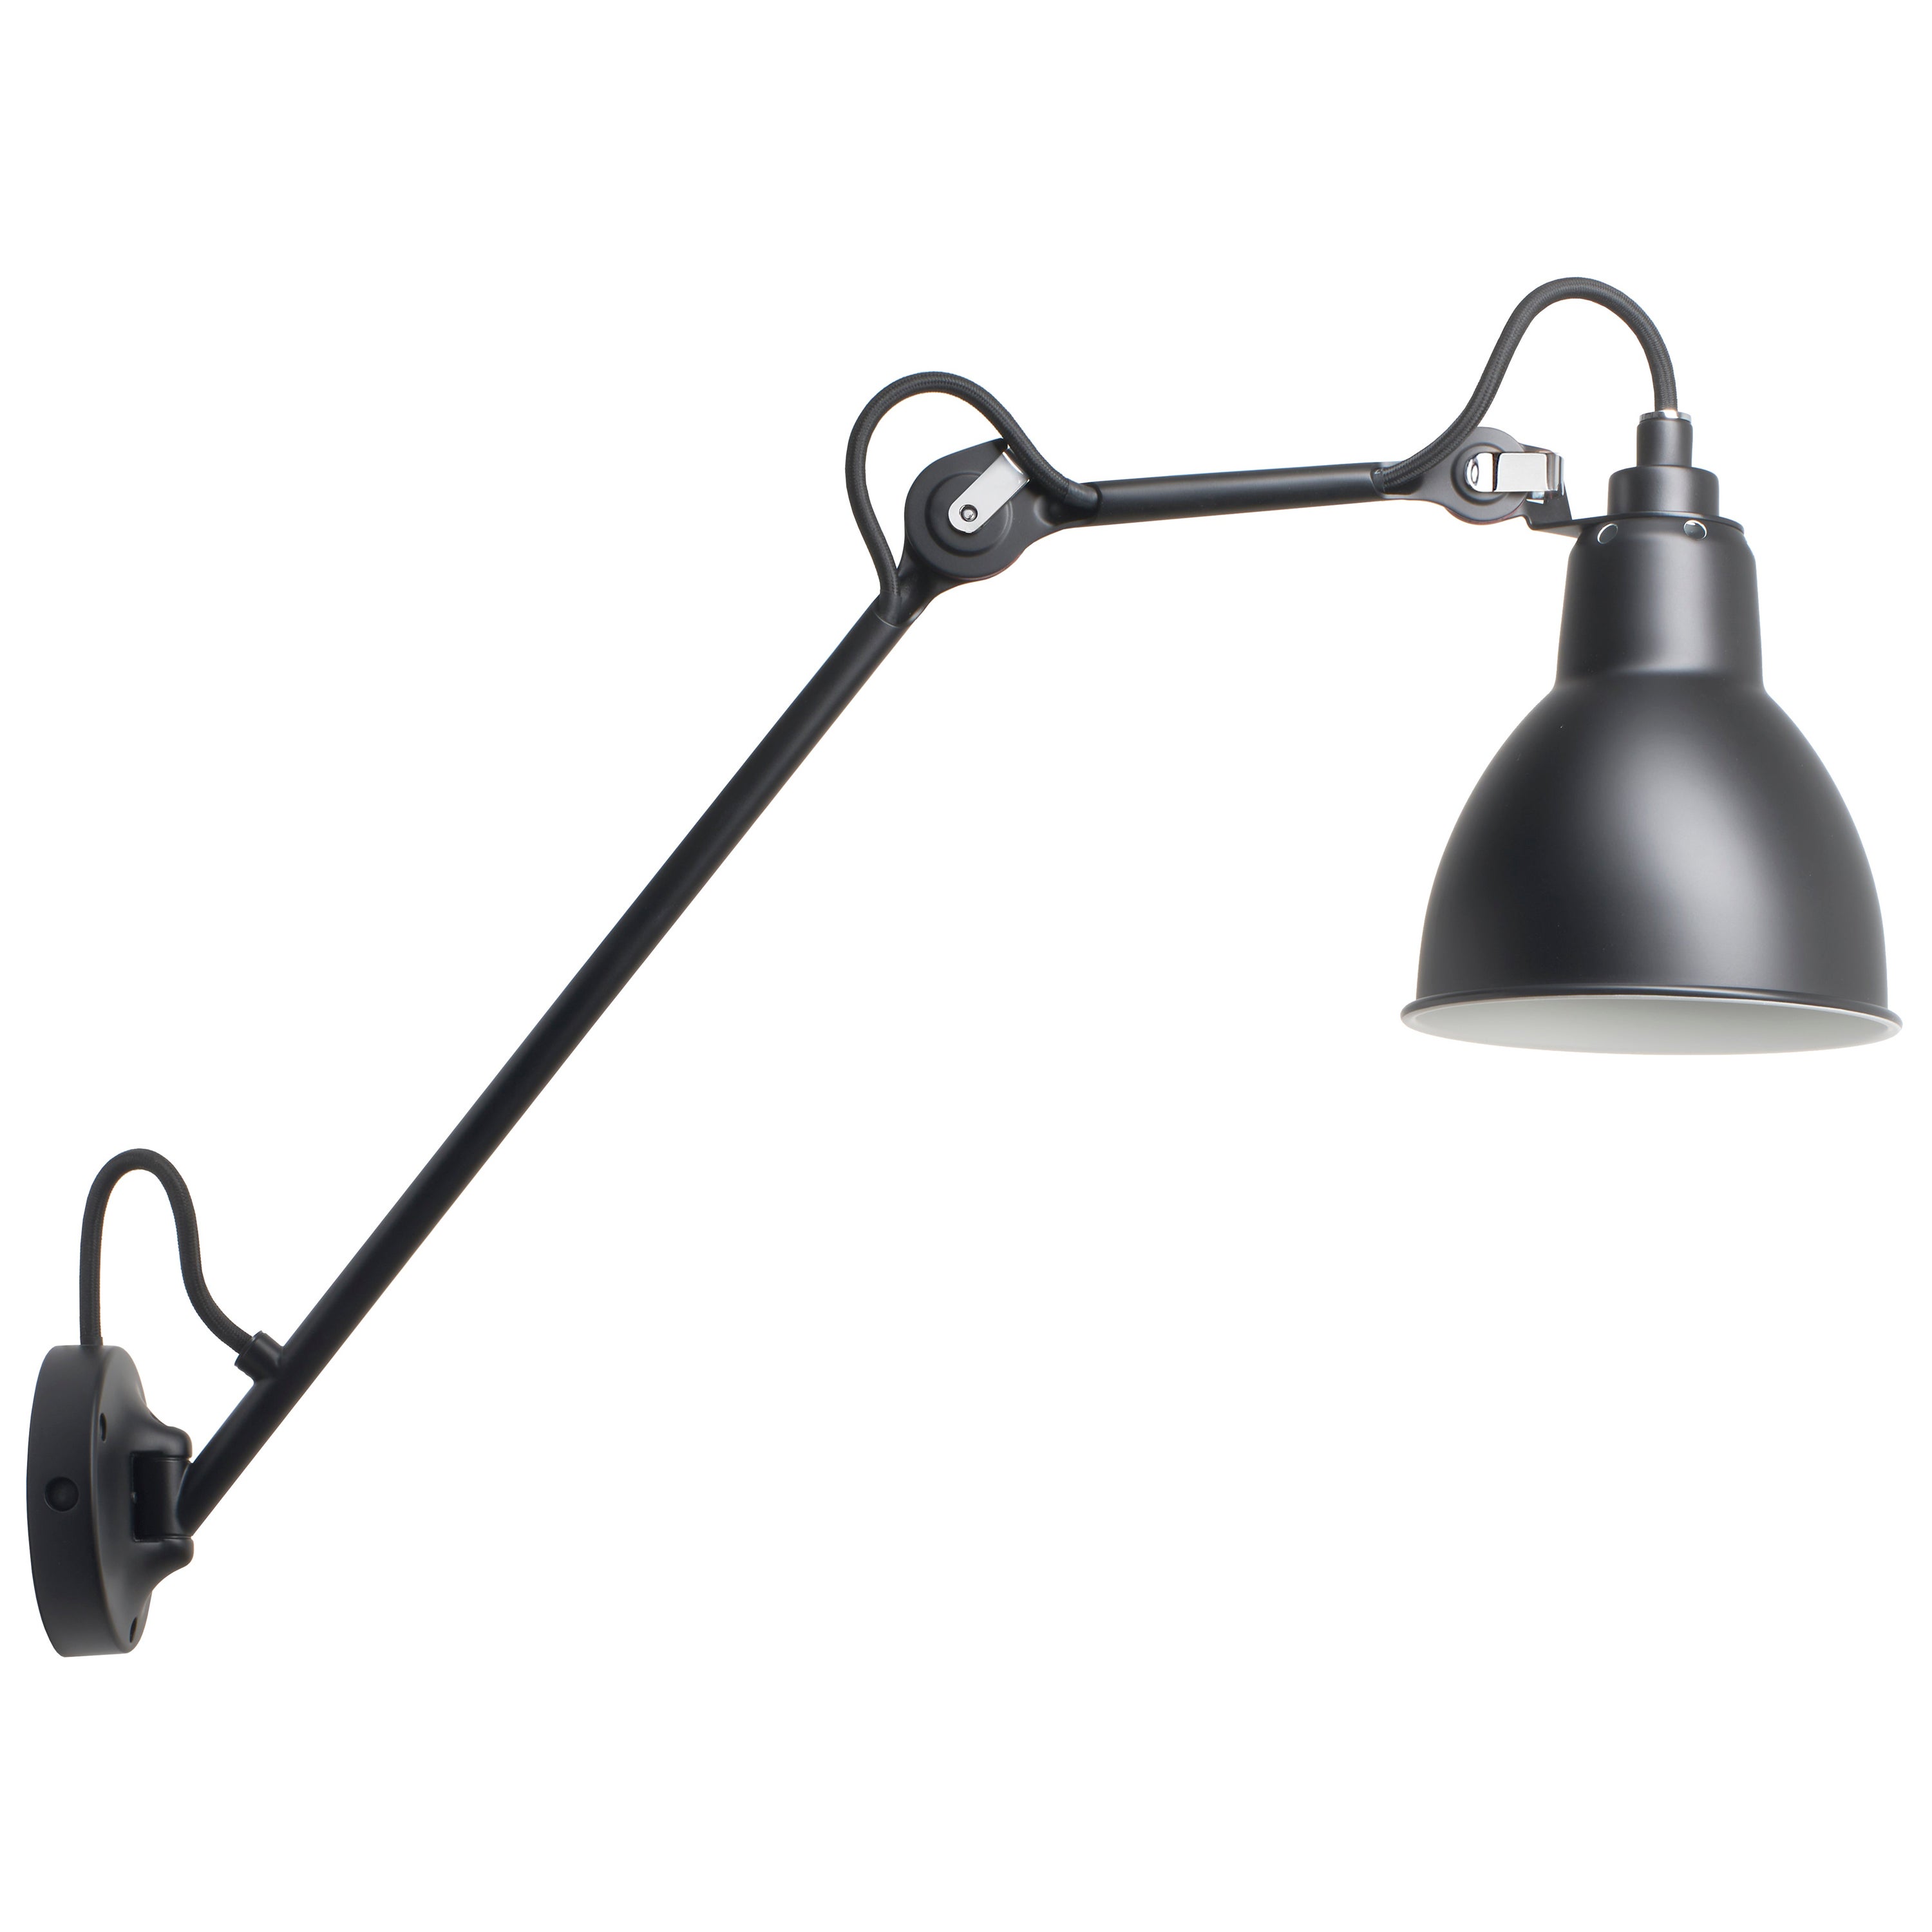 DCW Editions La Lampe Gras N°122 Wall Lamp in Black Arm and Black Shade For Sale